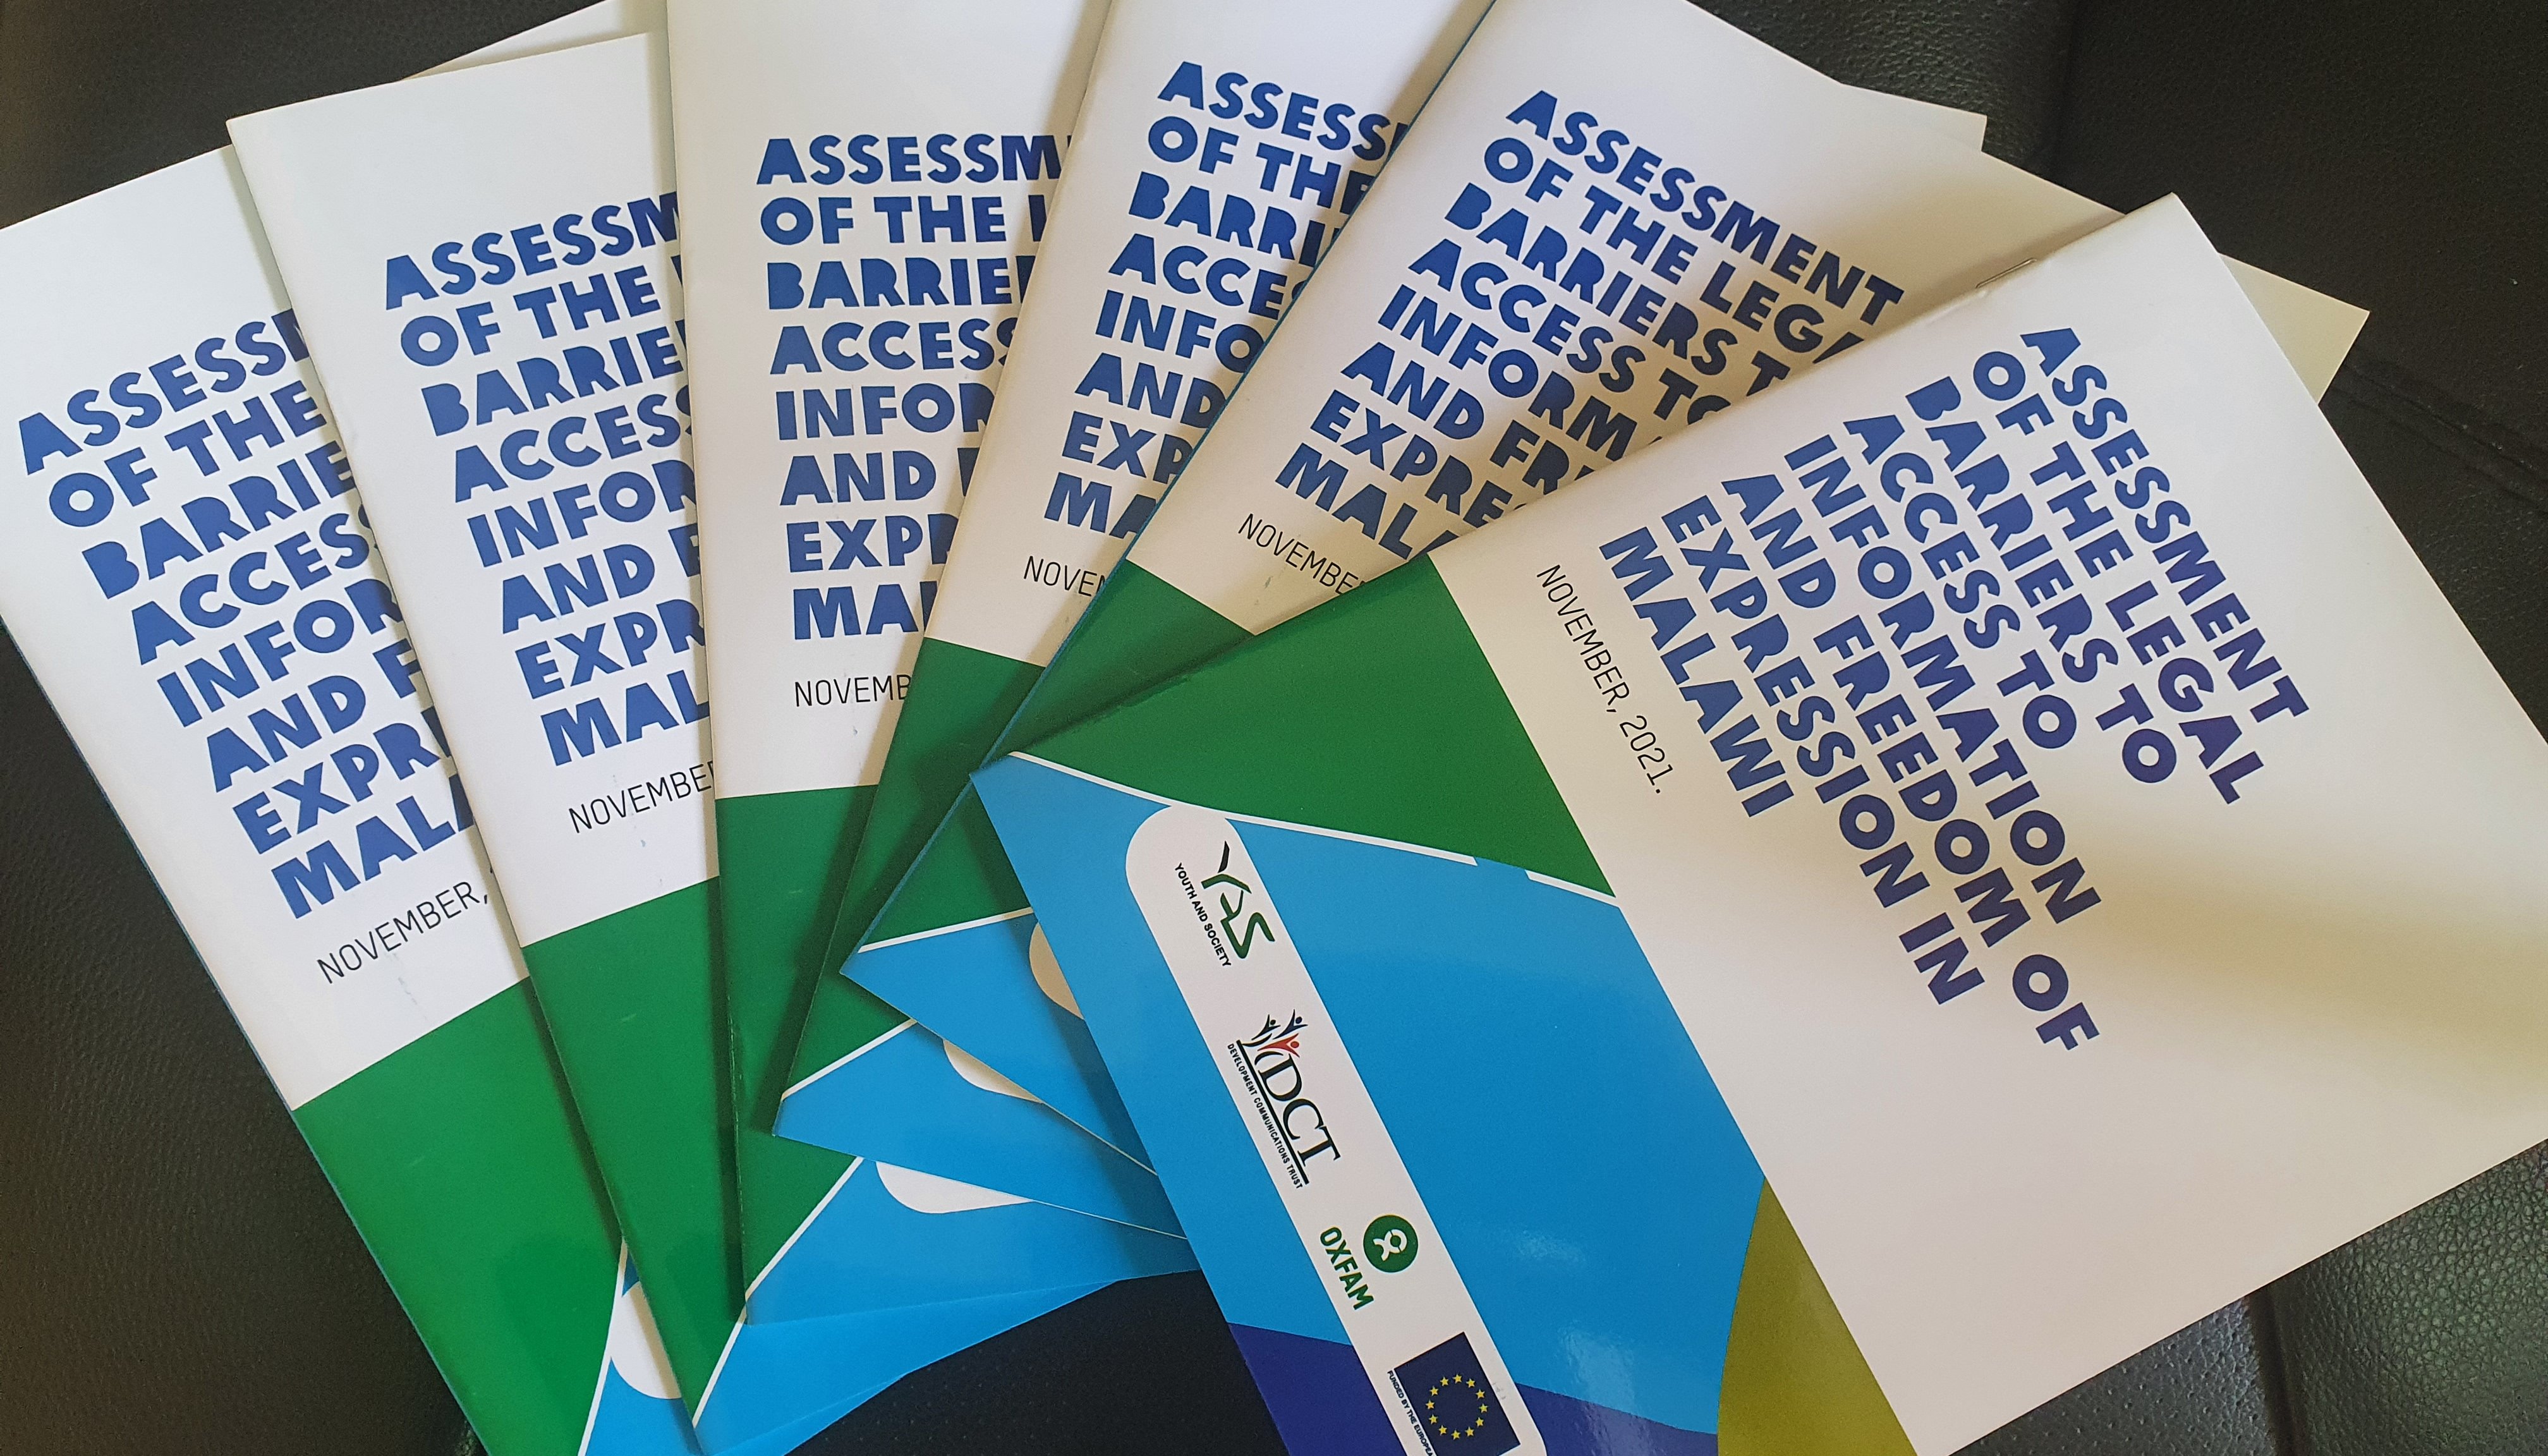 Read Assessment of the legal barriers to access to information and freedom of expression in Malawi by Oxfam in Southern Africa